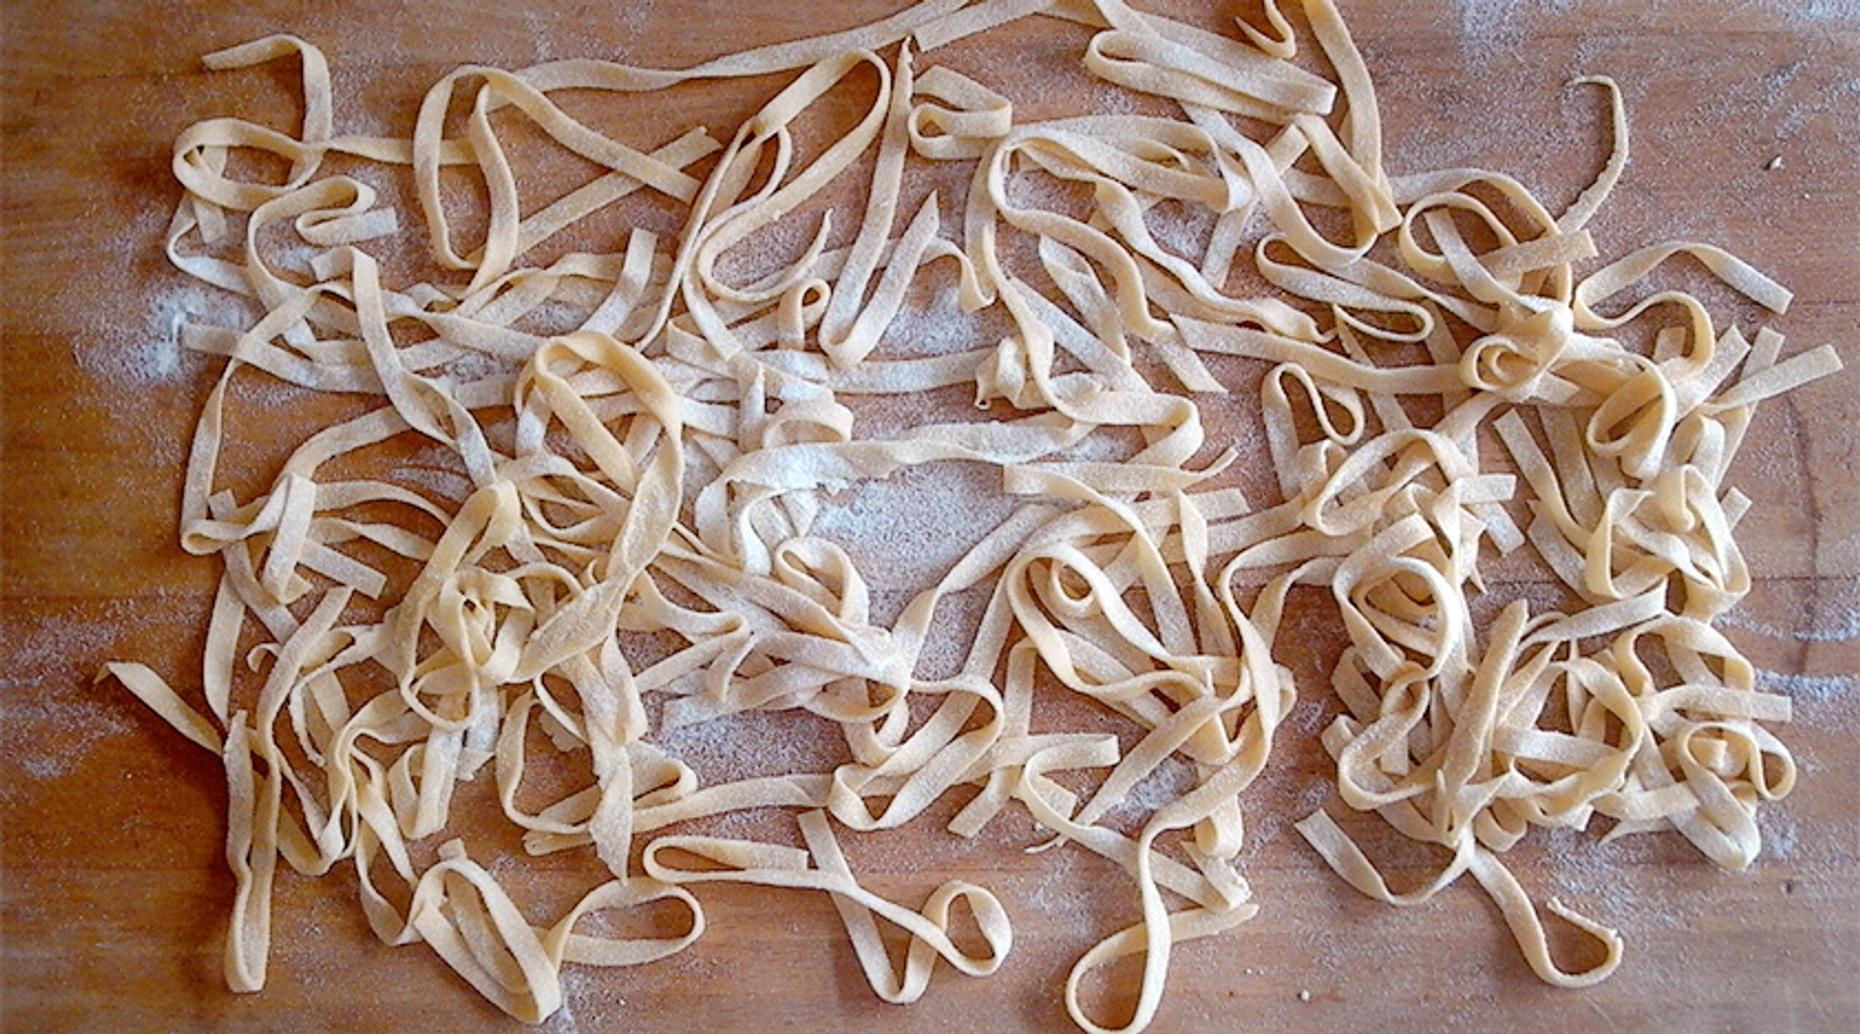 Pasta Making Class in Montague